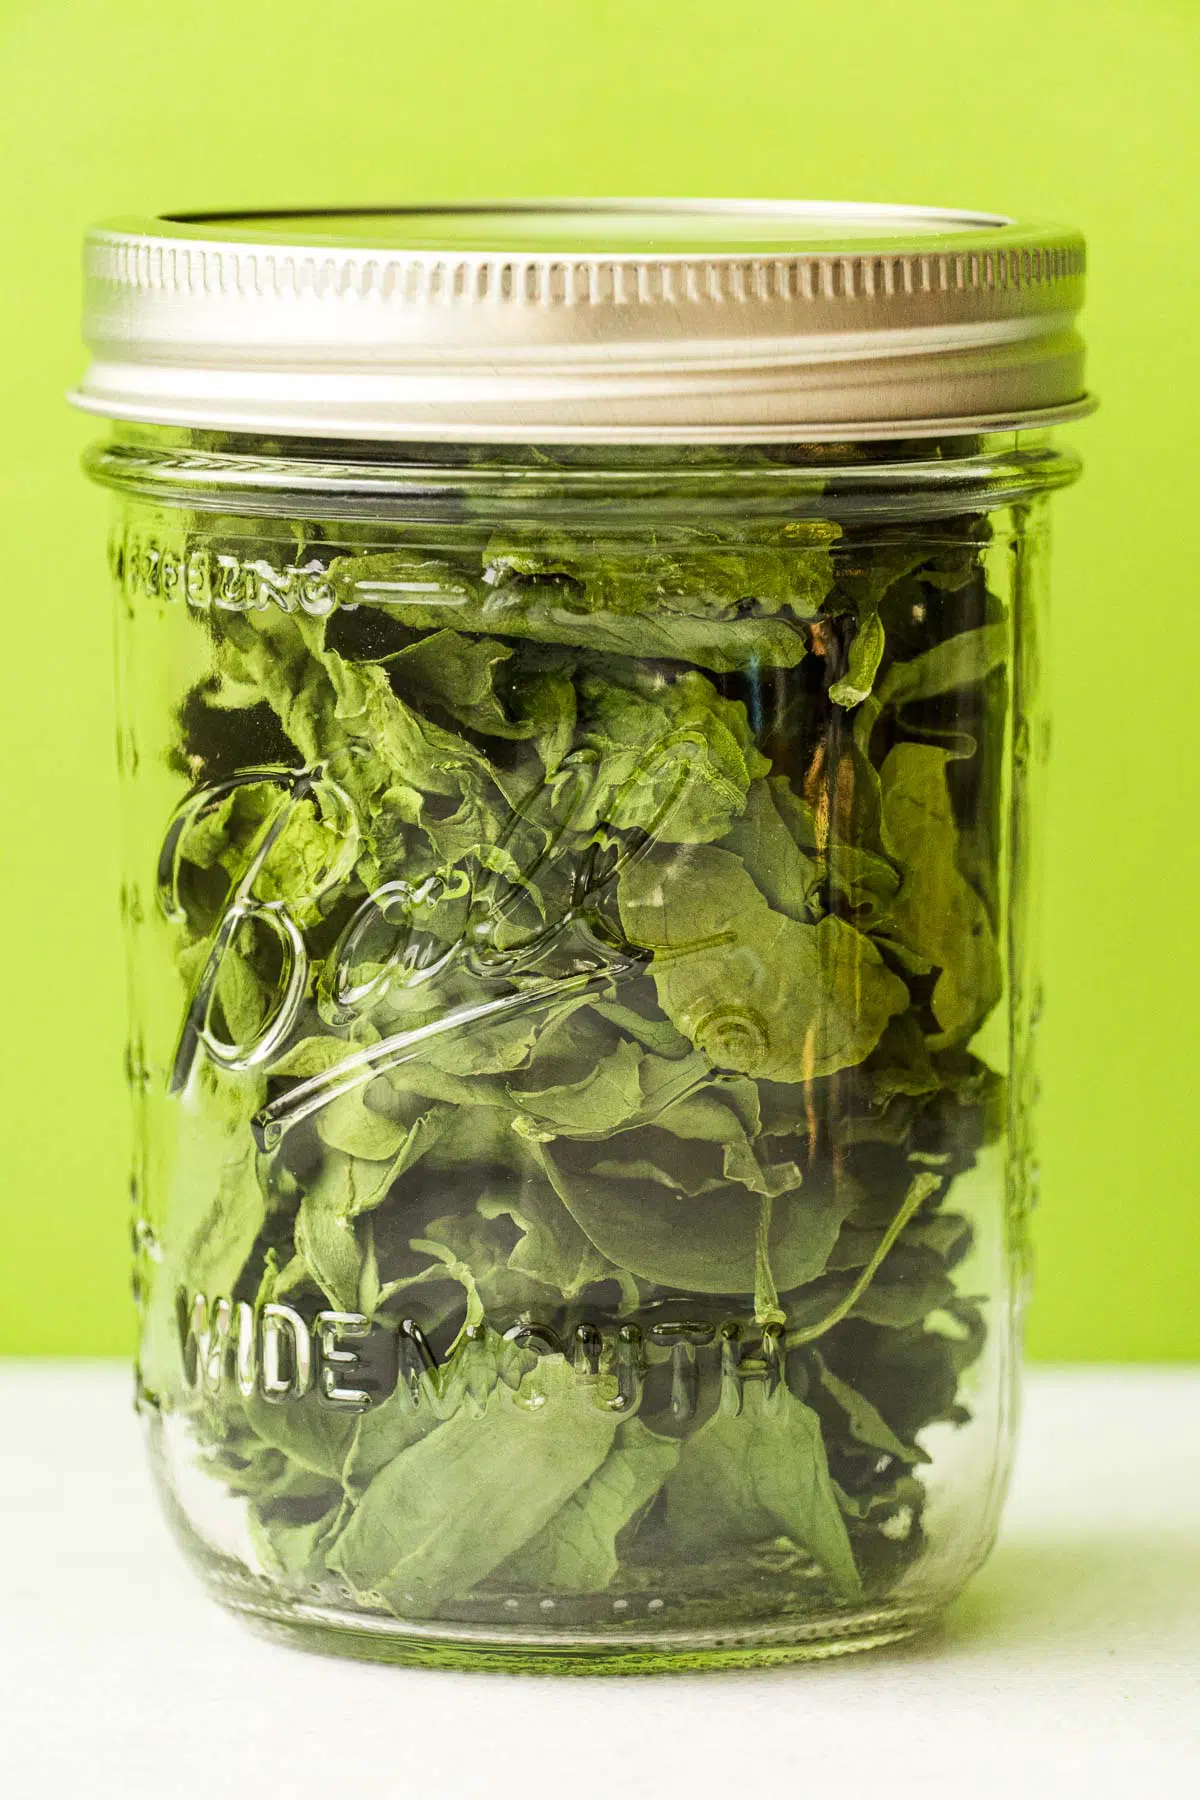 Dried spinach in a glass jar